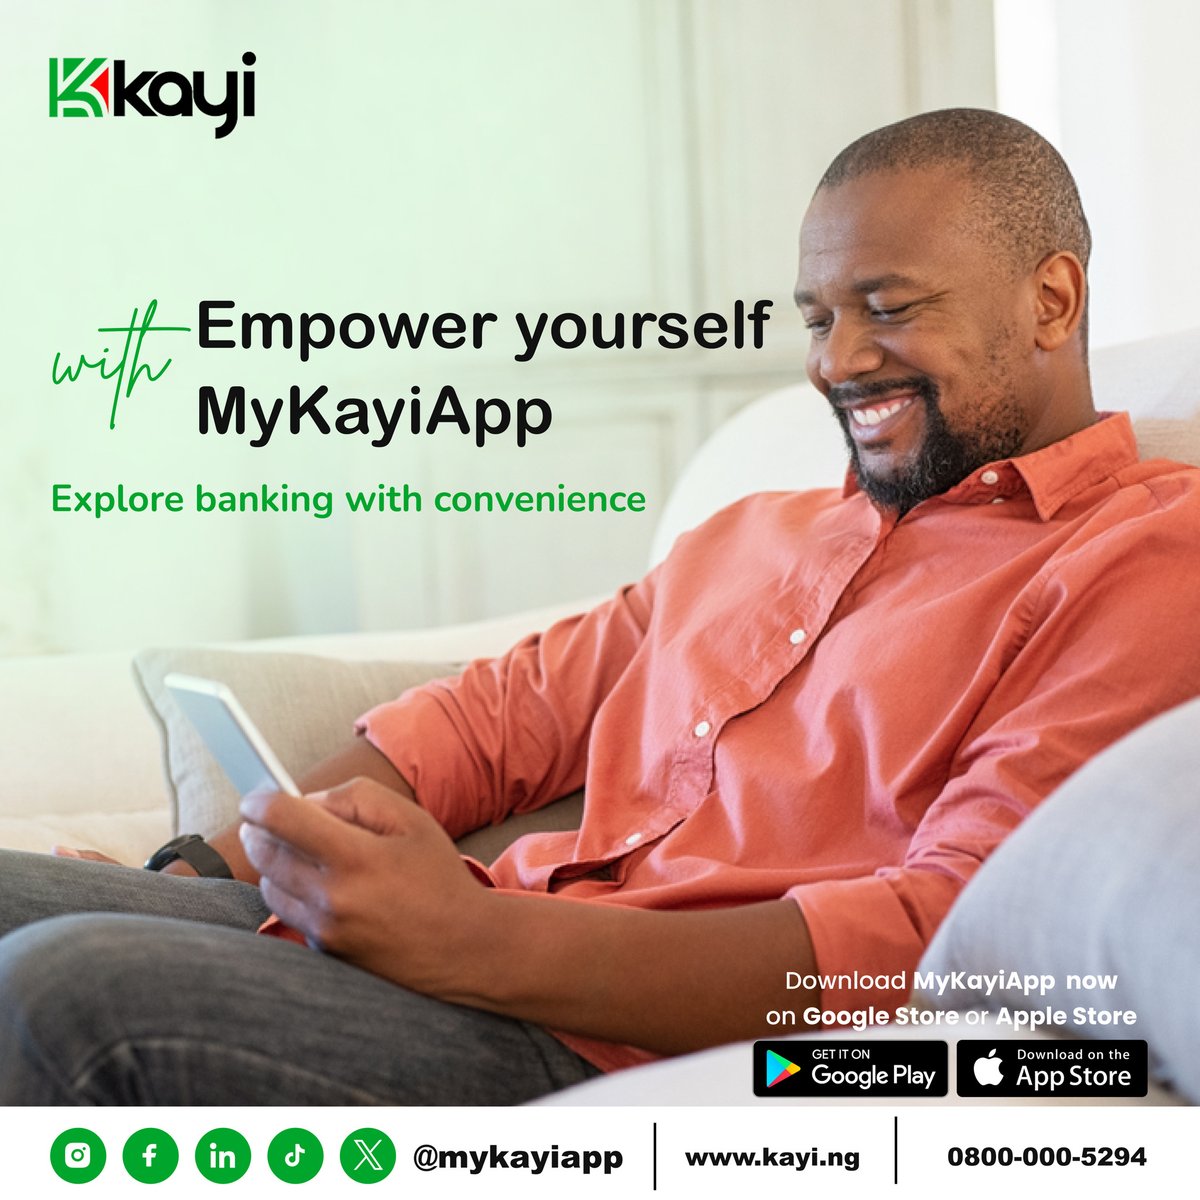 Empower yourself with MyKayiApp for a dynamic digital financial experience. Download now from Google Play Store or Apple App Store to redefine banking with endless possibilities.

#MyKayiApp #NowLive #Kayiway #DownloadNow #Bankingwithoutlimits #downloadmykayiapp